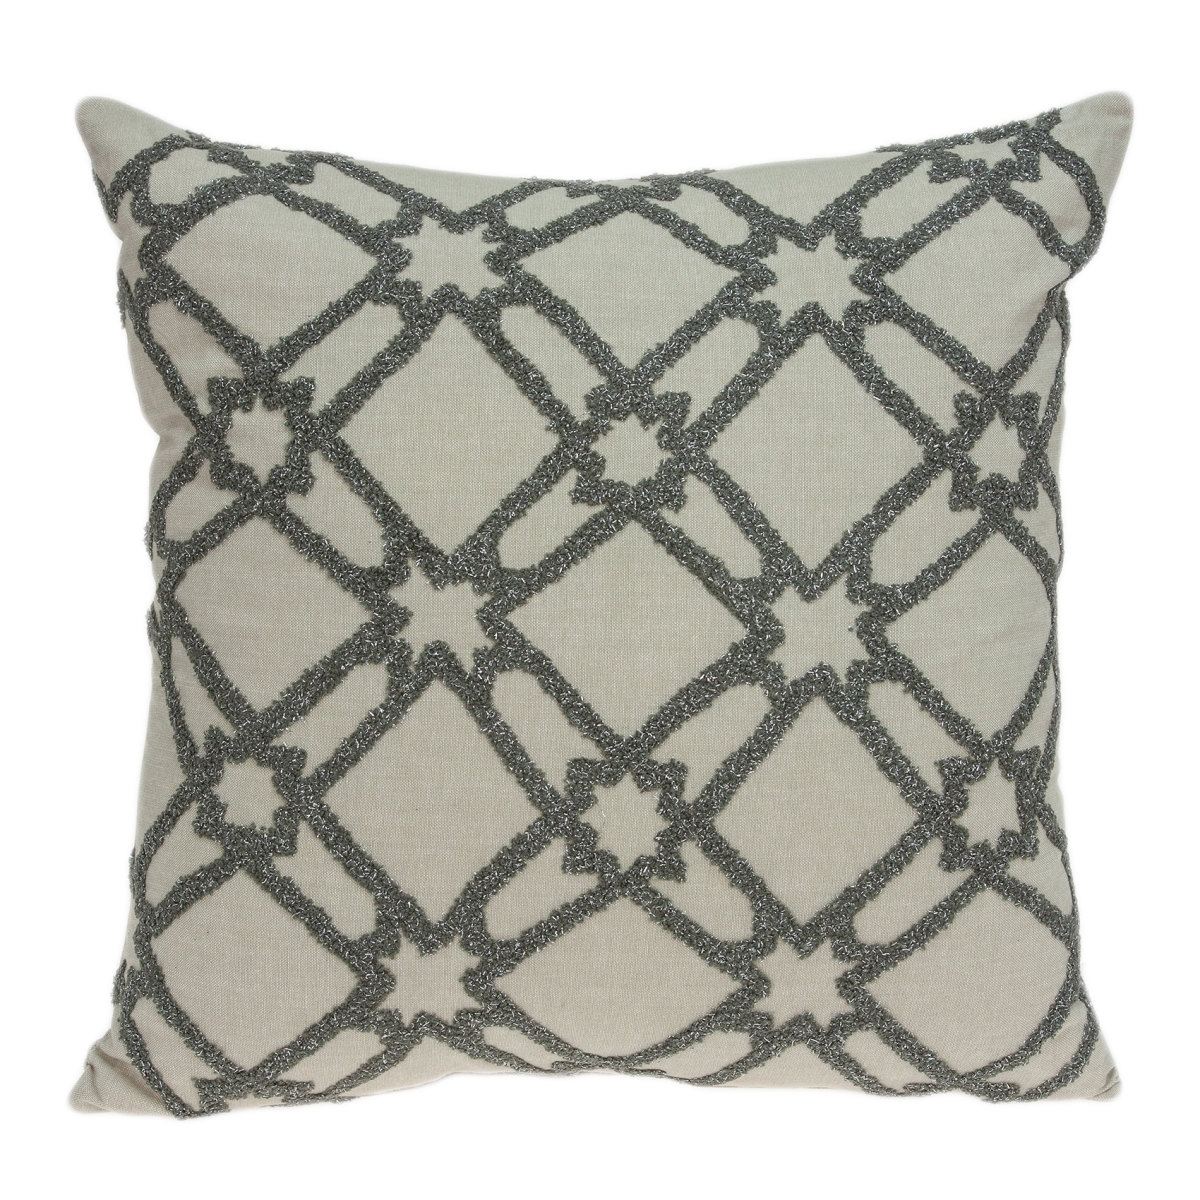 Pild11104c Cora Beige & Grey Square Transitional Pillow Cover - 20 X 20 X 0.5 In.